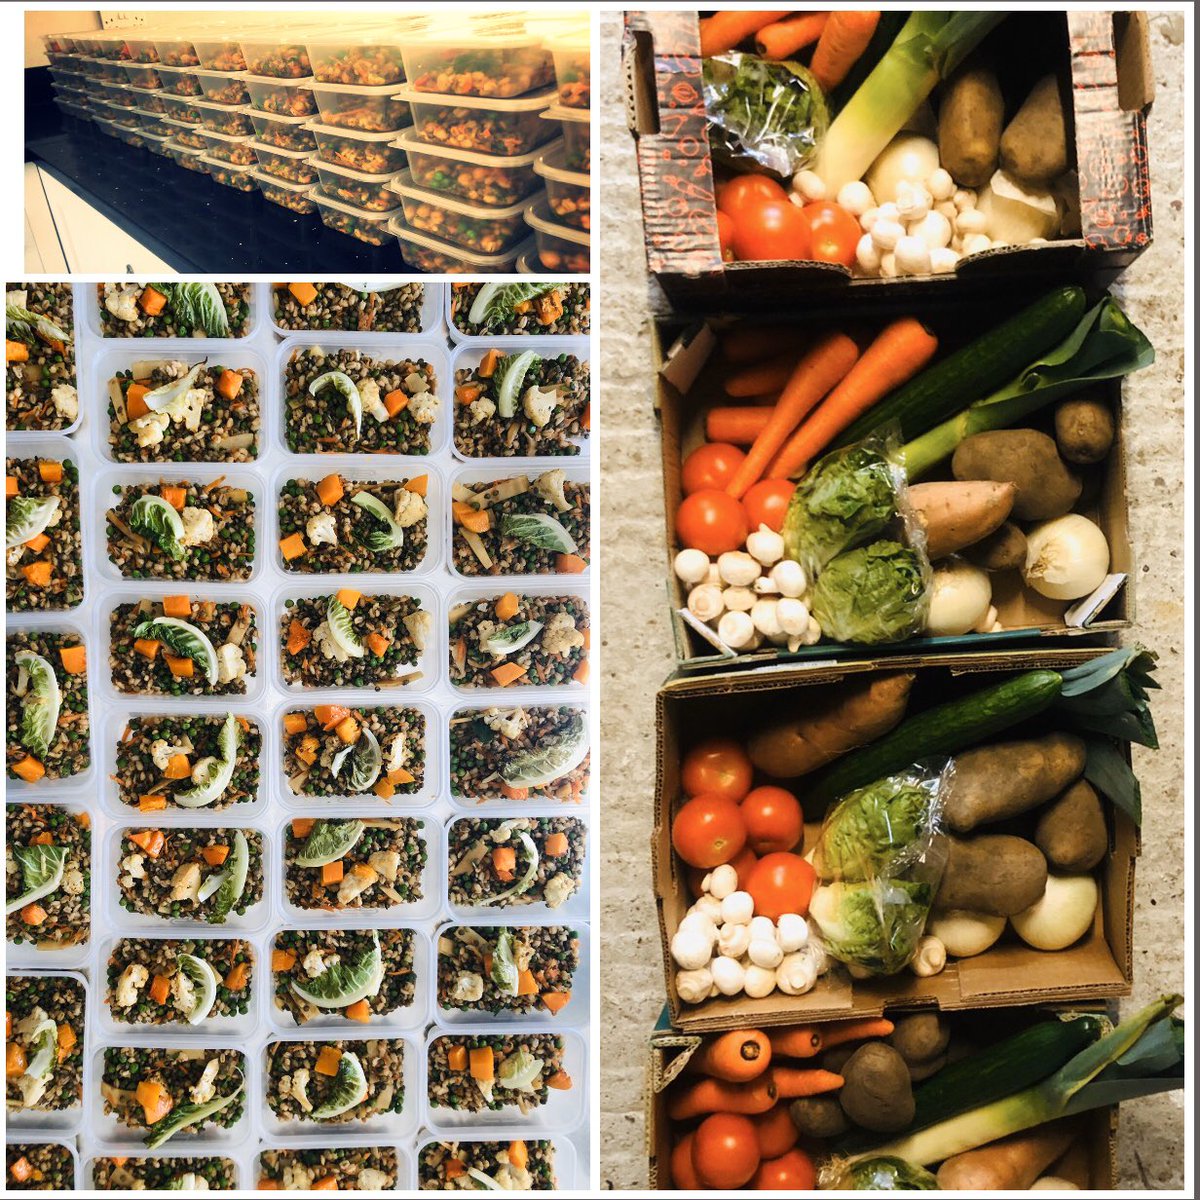 Community veg boxes and dinner for 100 of our local #NHSheros going out this evening thanks to @MajorInt_MattO @1CSL @vegetarianexpre for this lovely lot @arareborn @samuelBpotter @gwbramwell @rousechar #nhsvolunteer #helpushelpthem